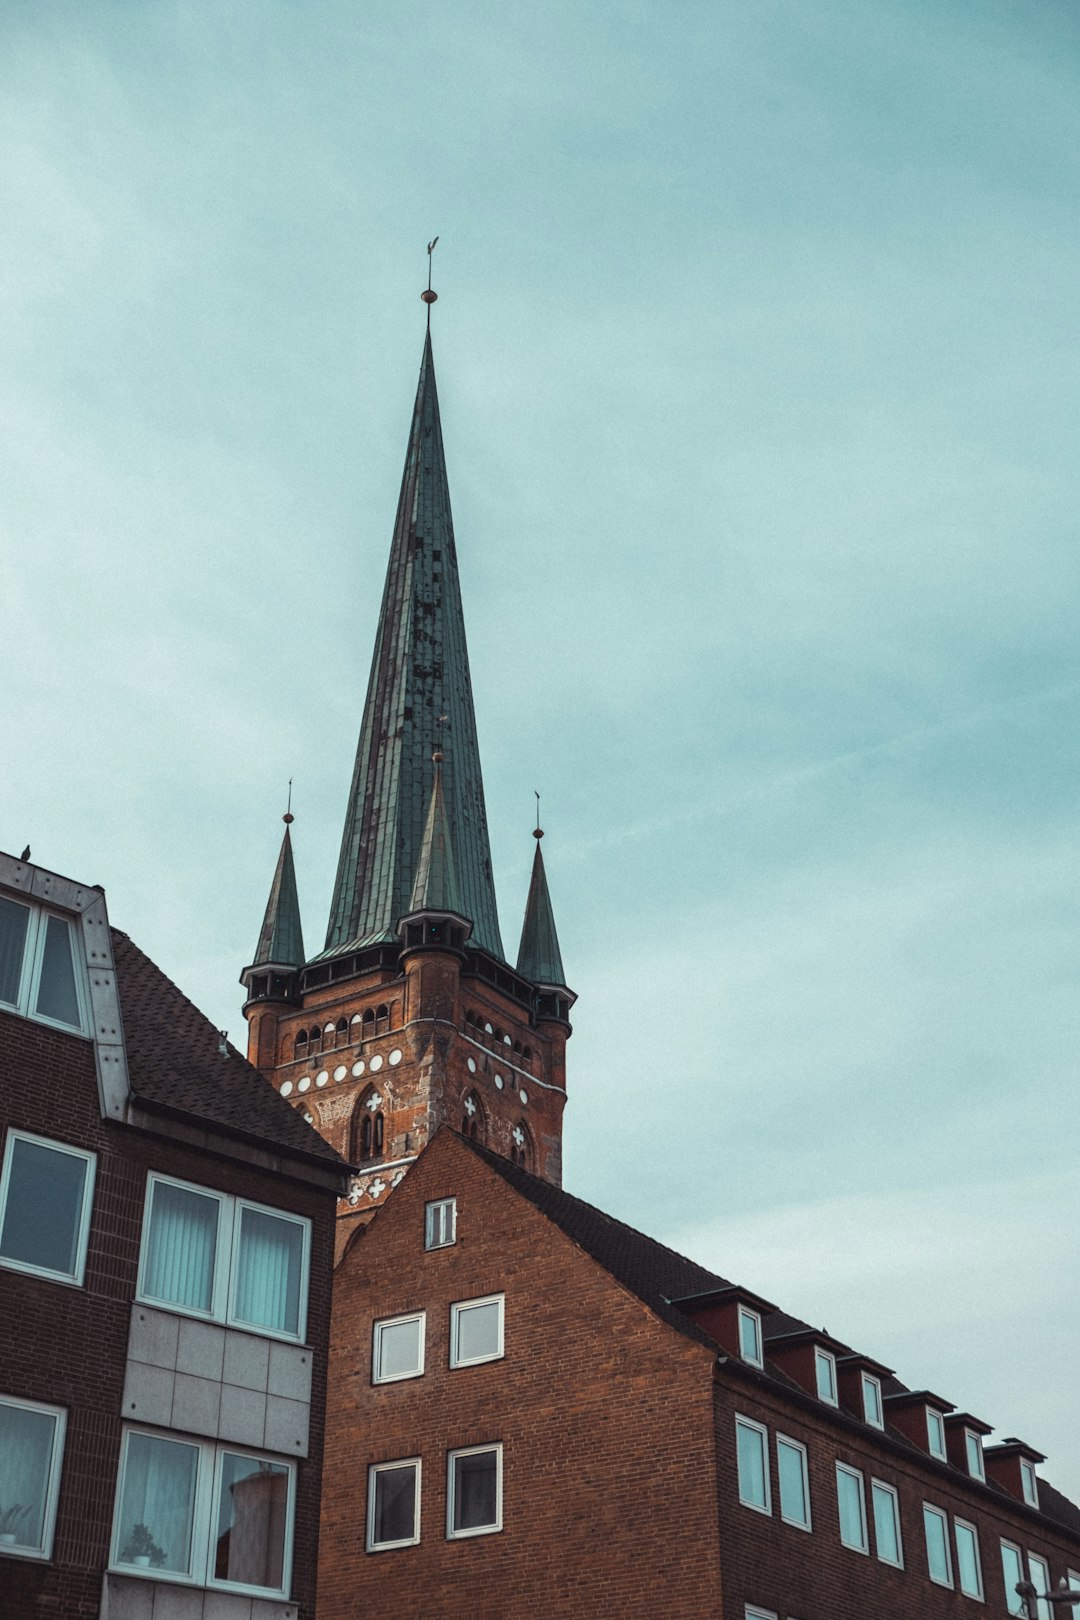 Travel Tips and Stories of Lübeck in Germany